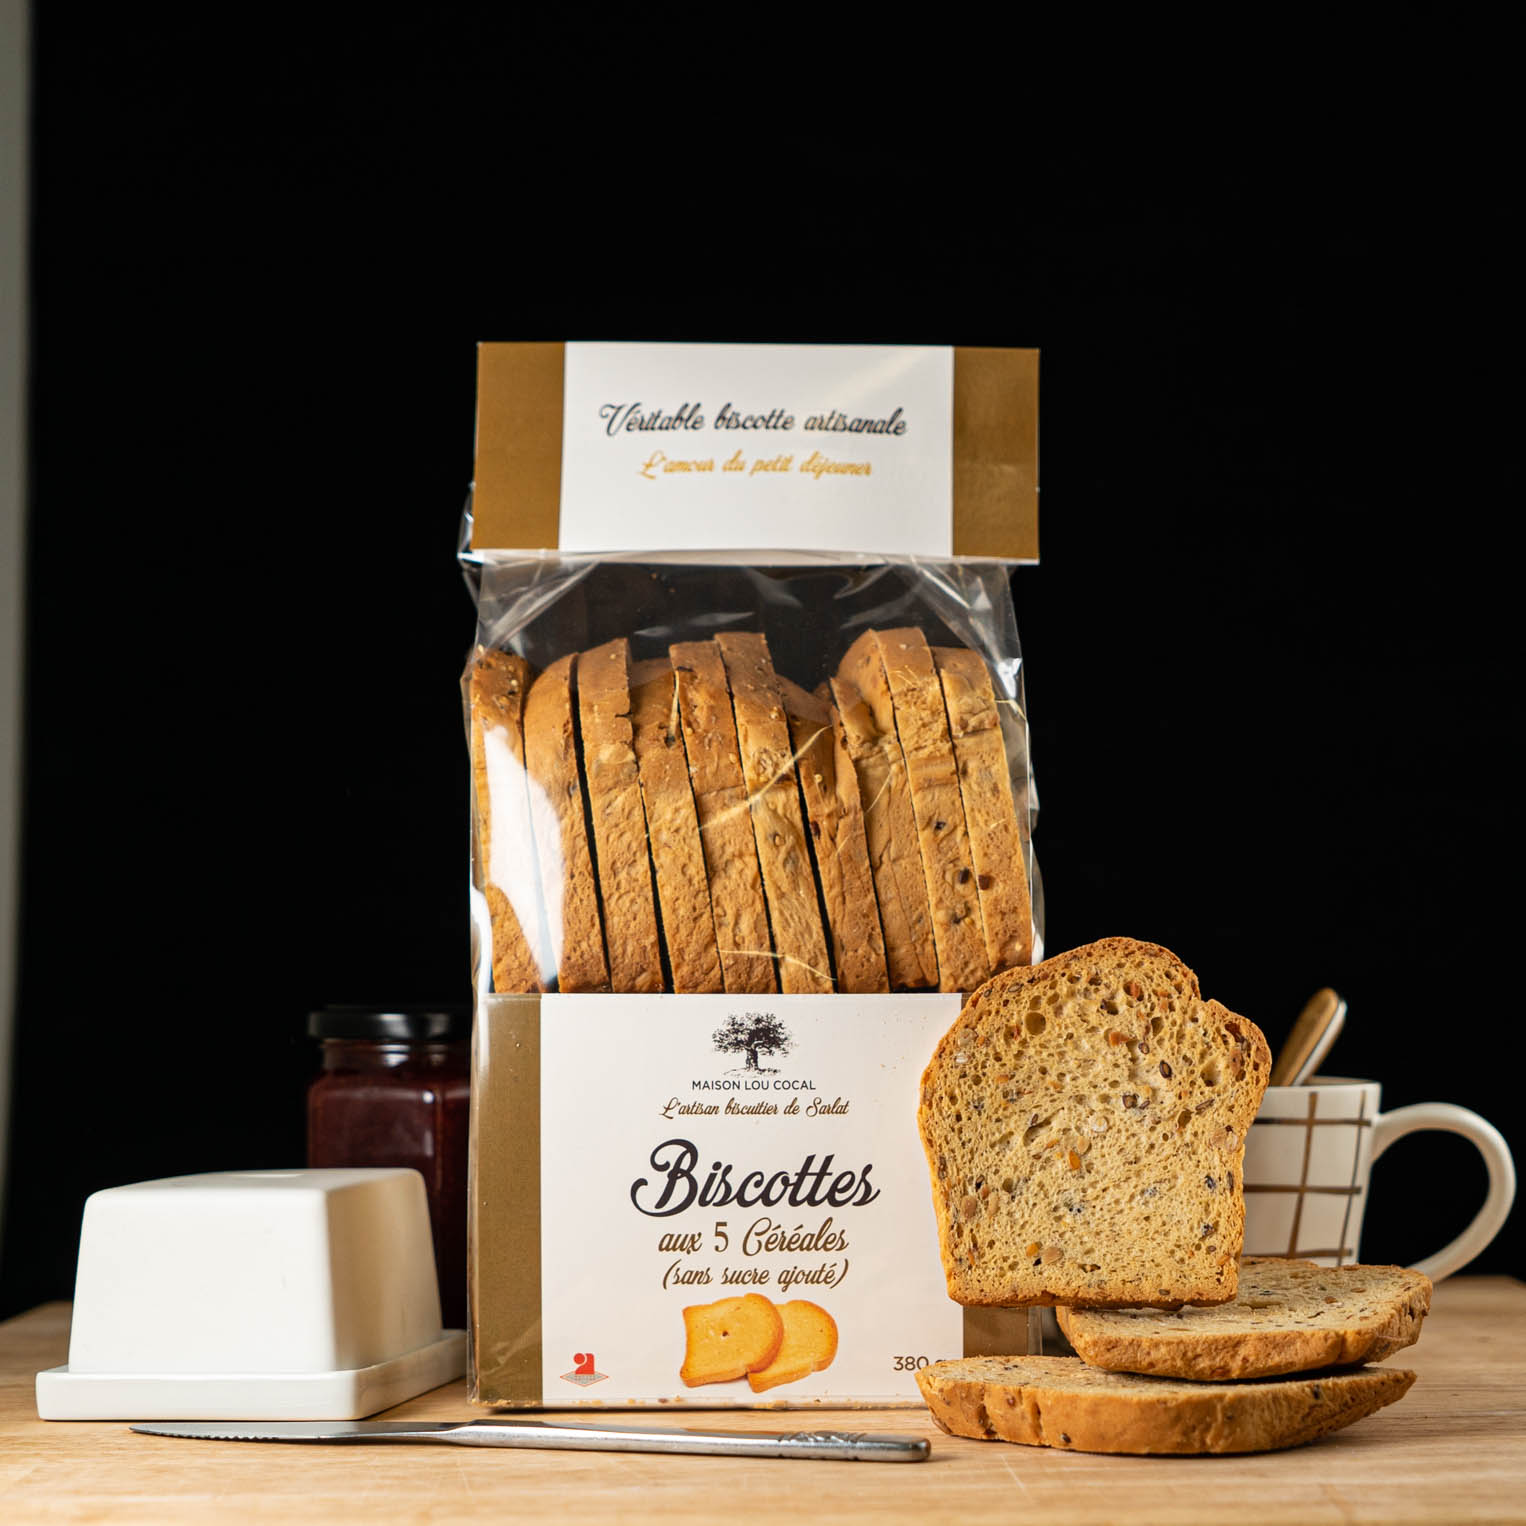 Biscottes – Eataly